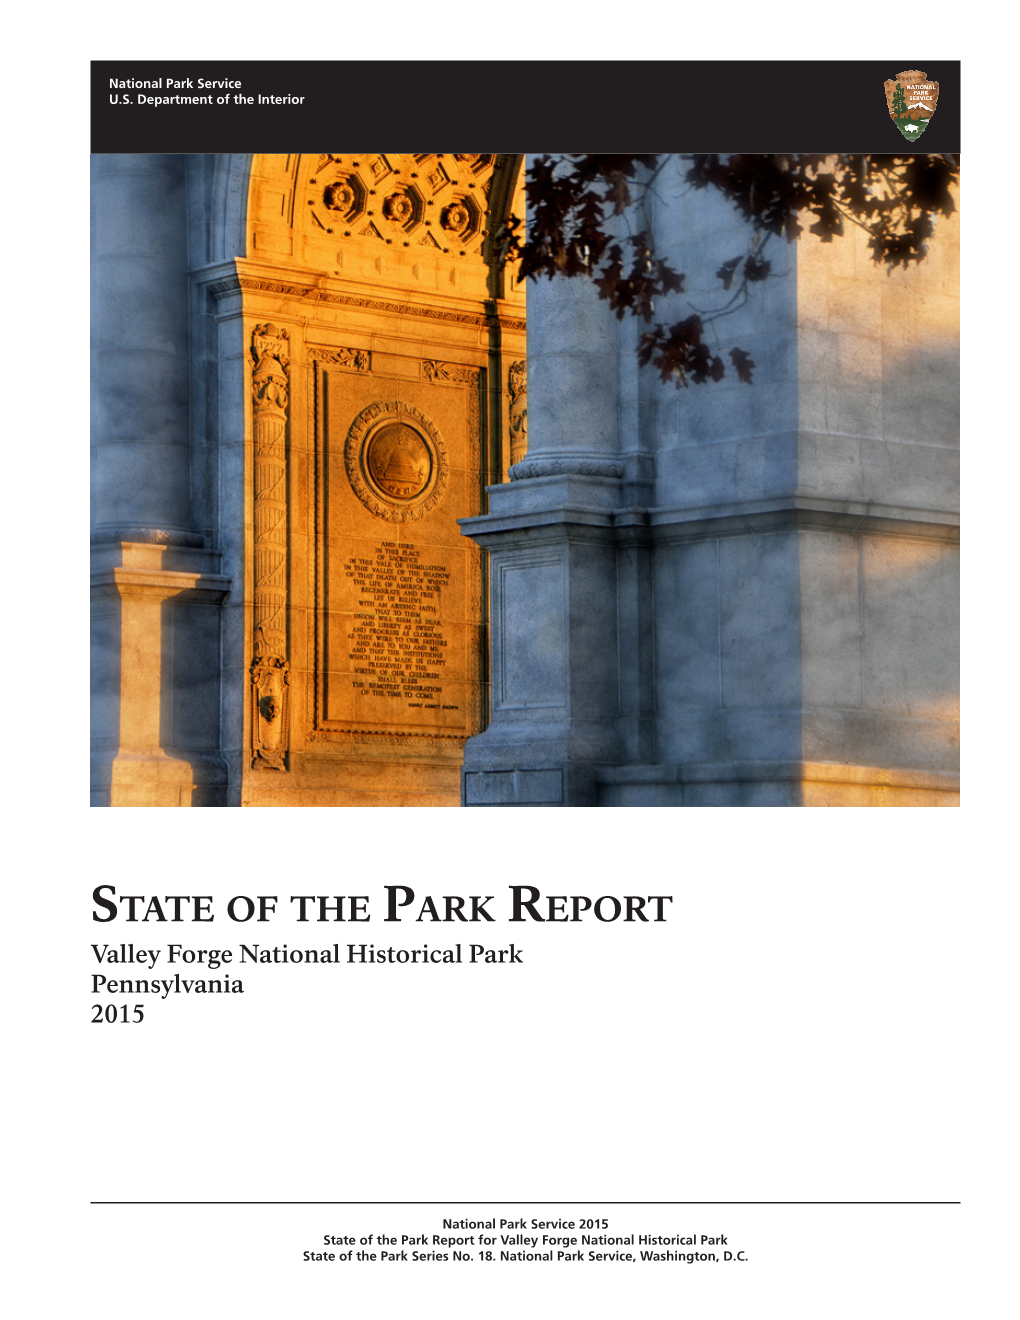 State of the Park Report: Valley Forge National Historical Park